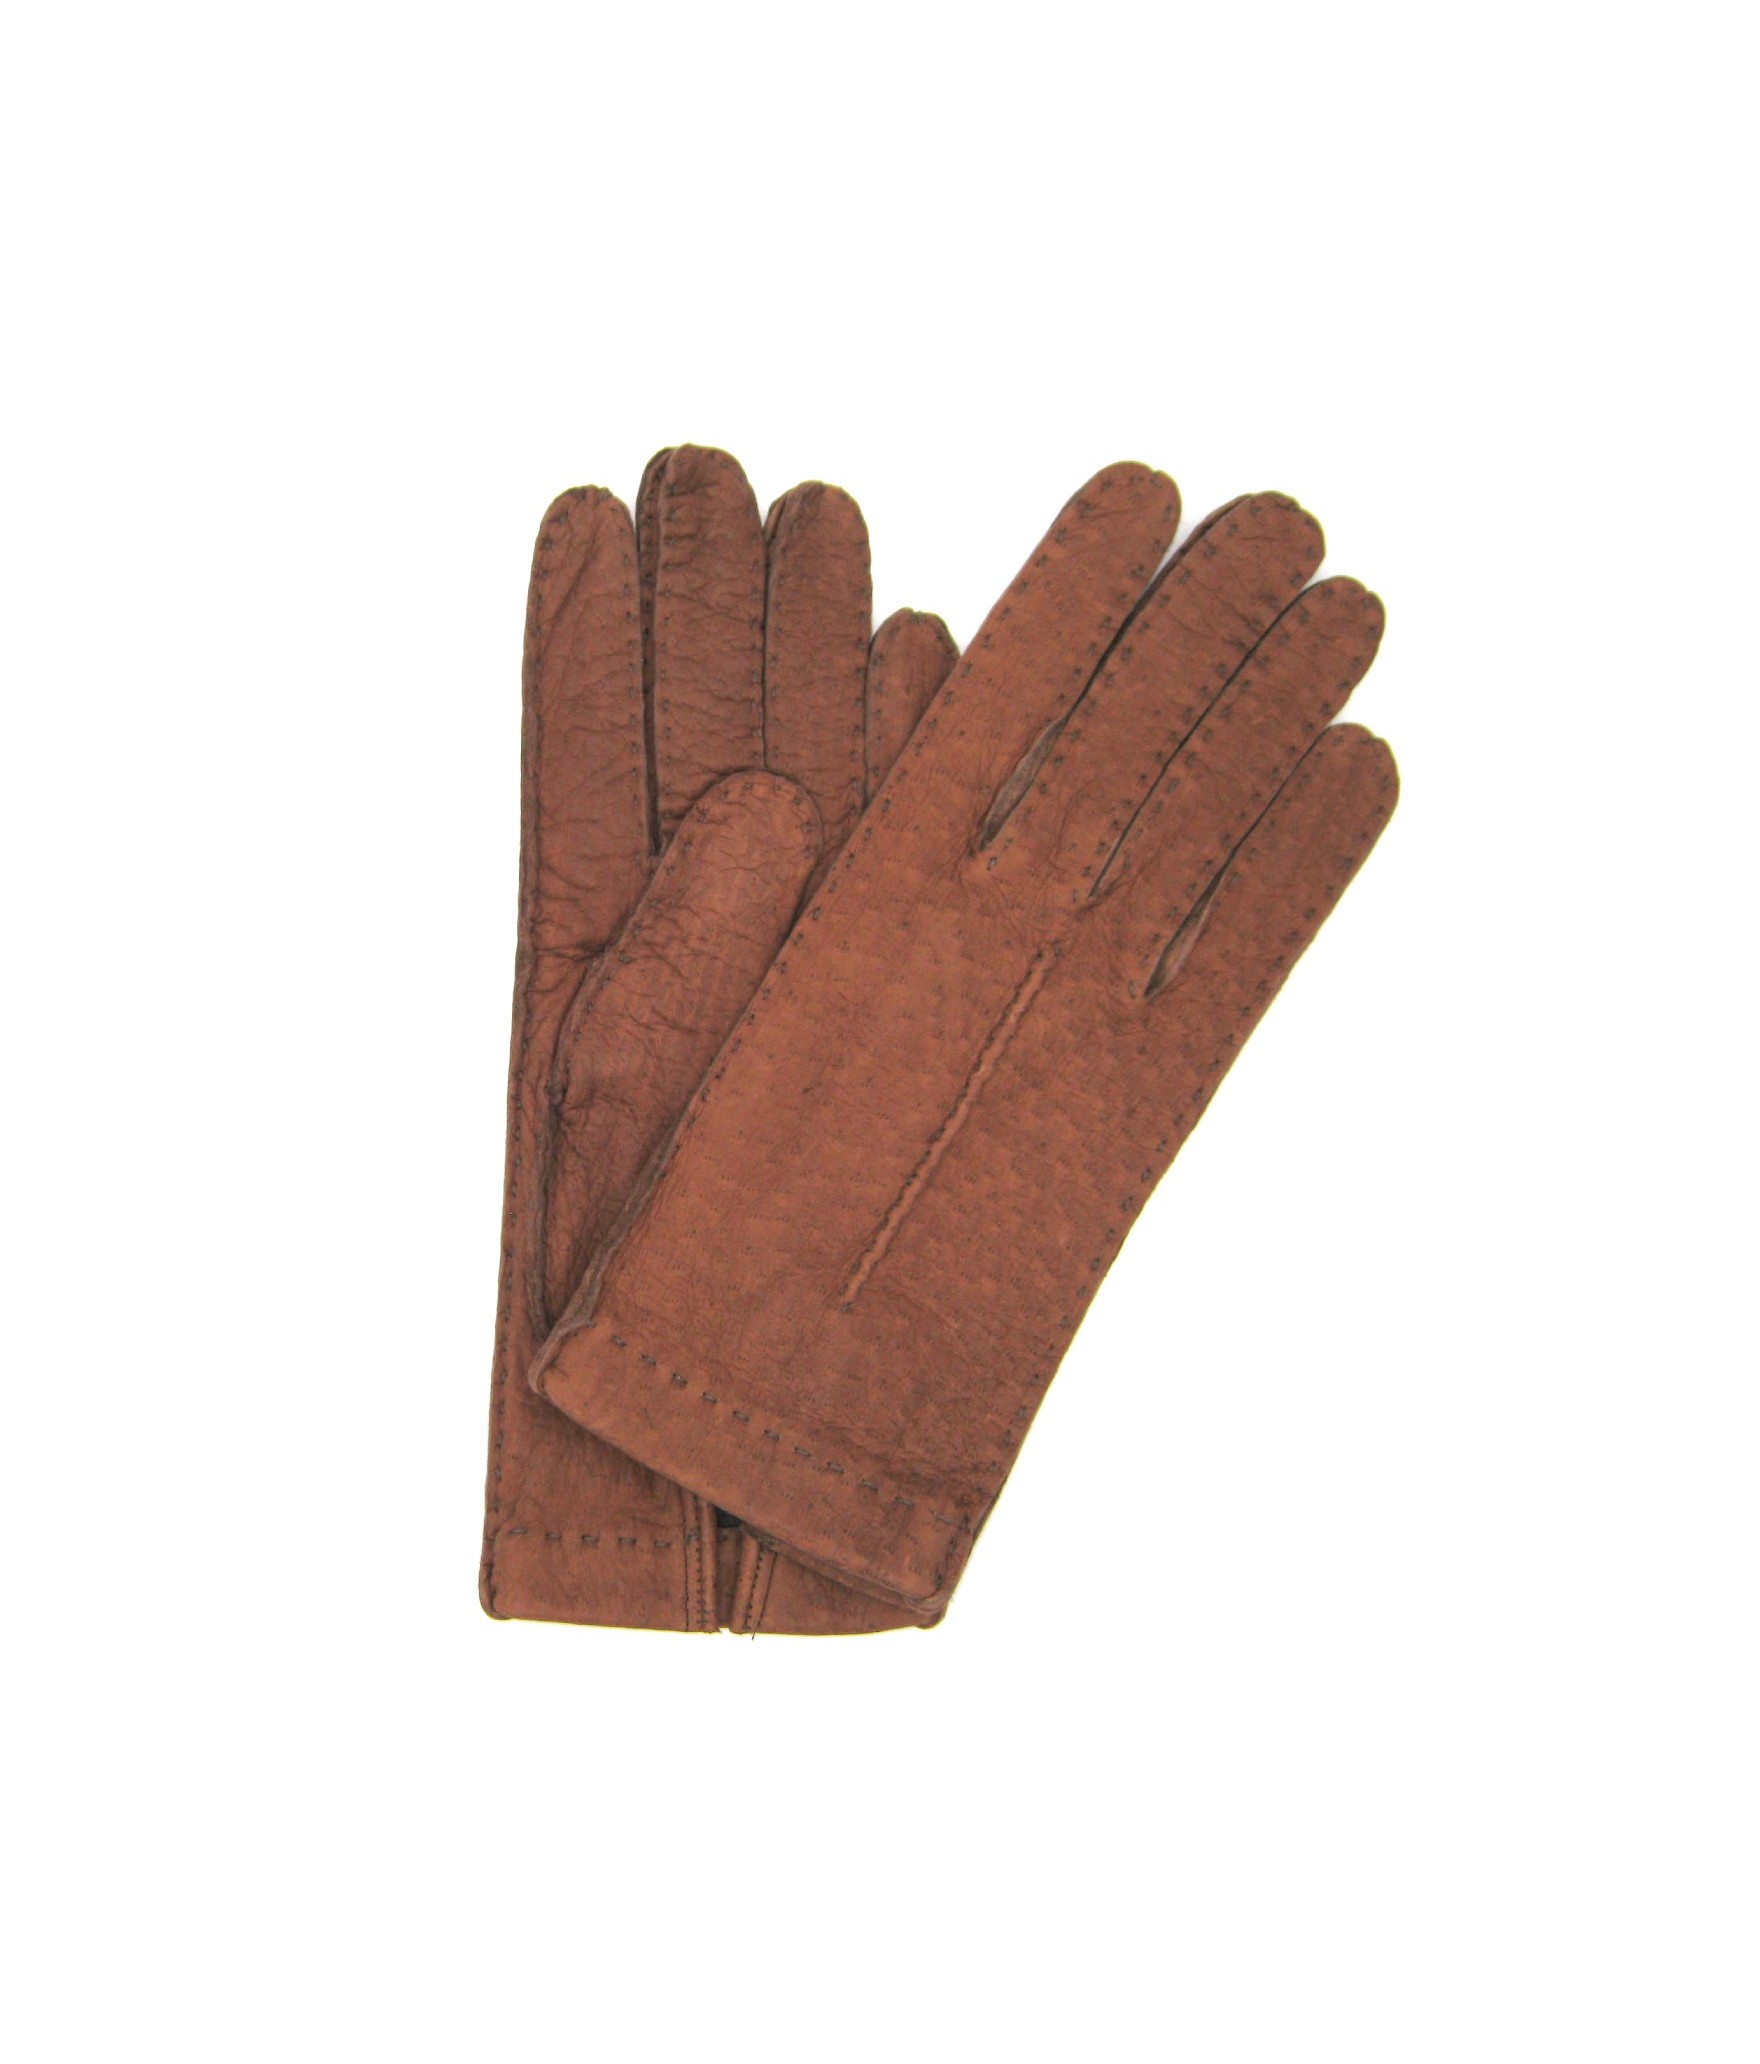 Unlined Peccary leather gloves with Hand Stitching  Tobacco